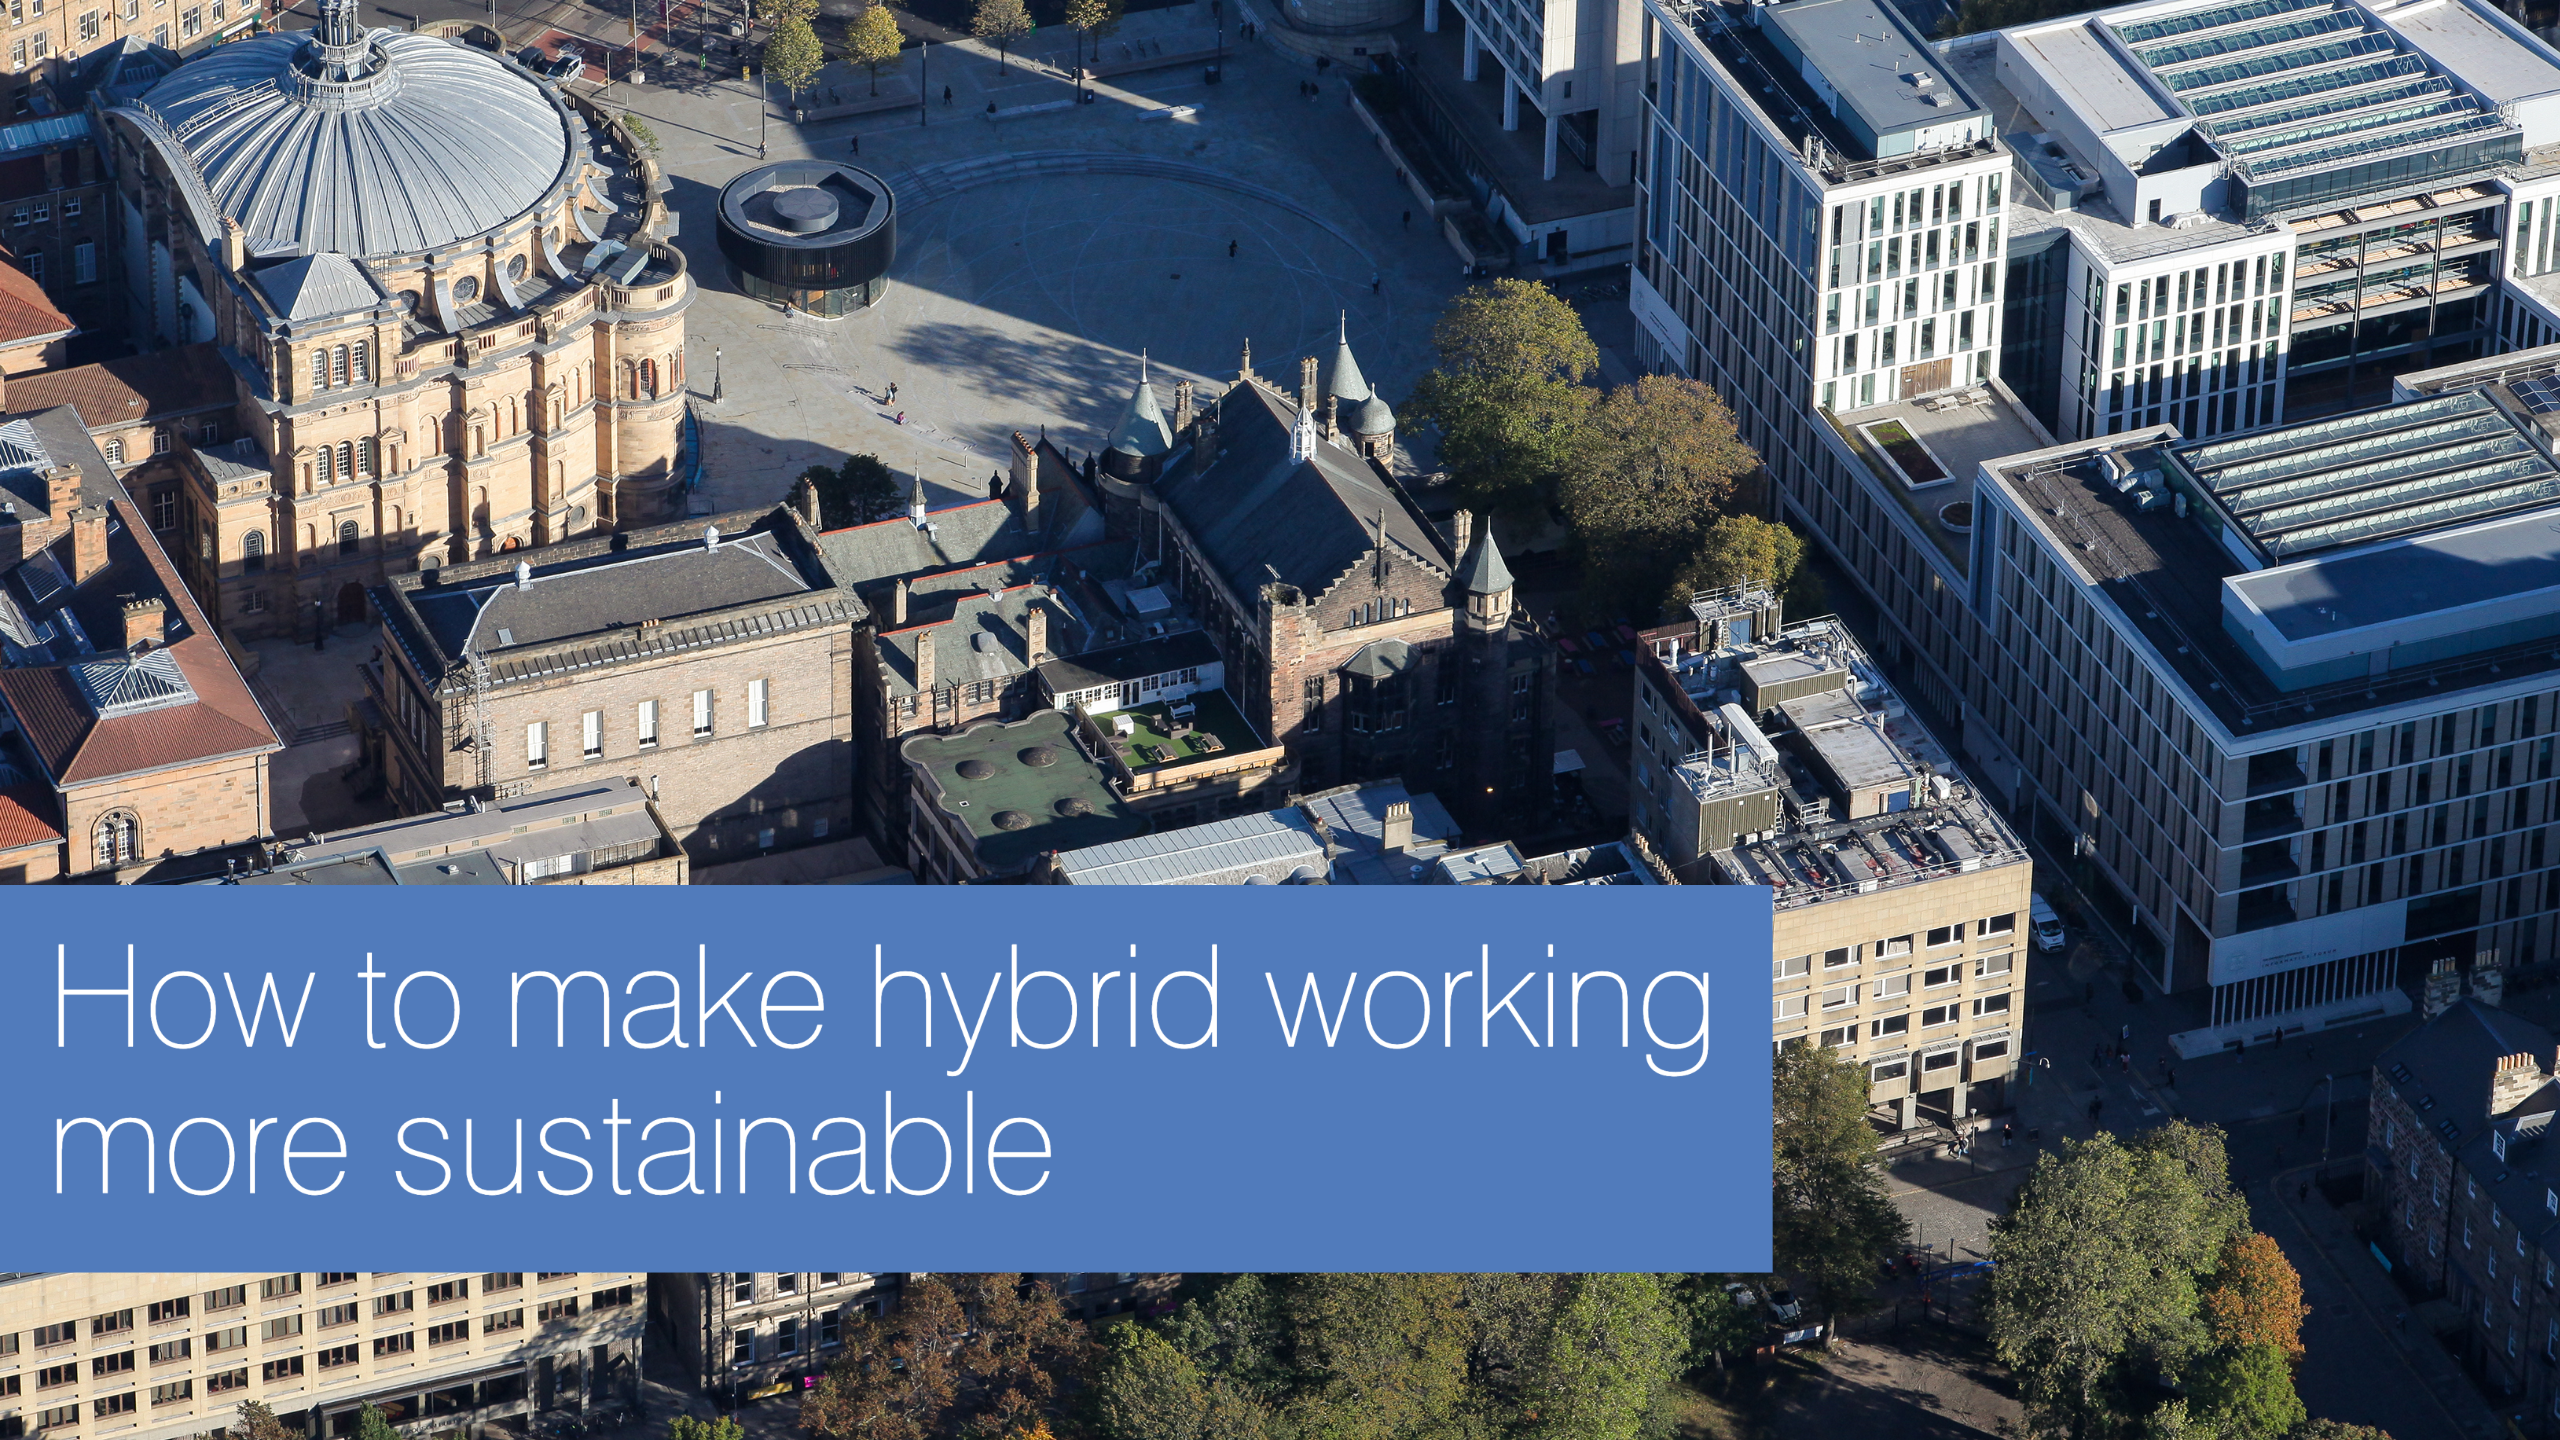 How to make hybrid working more sustainable